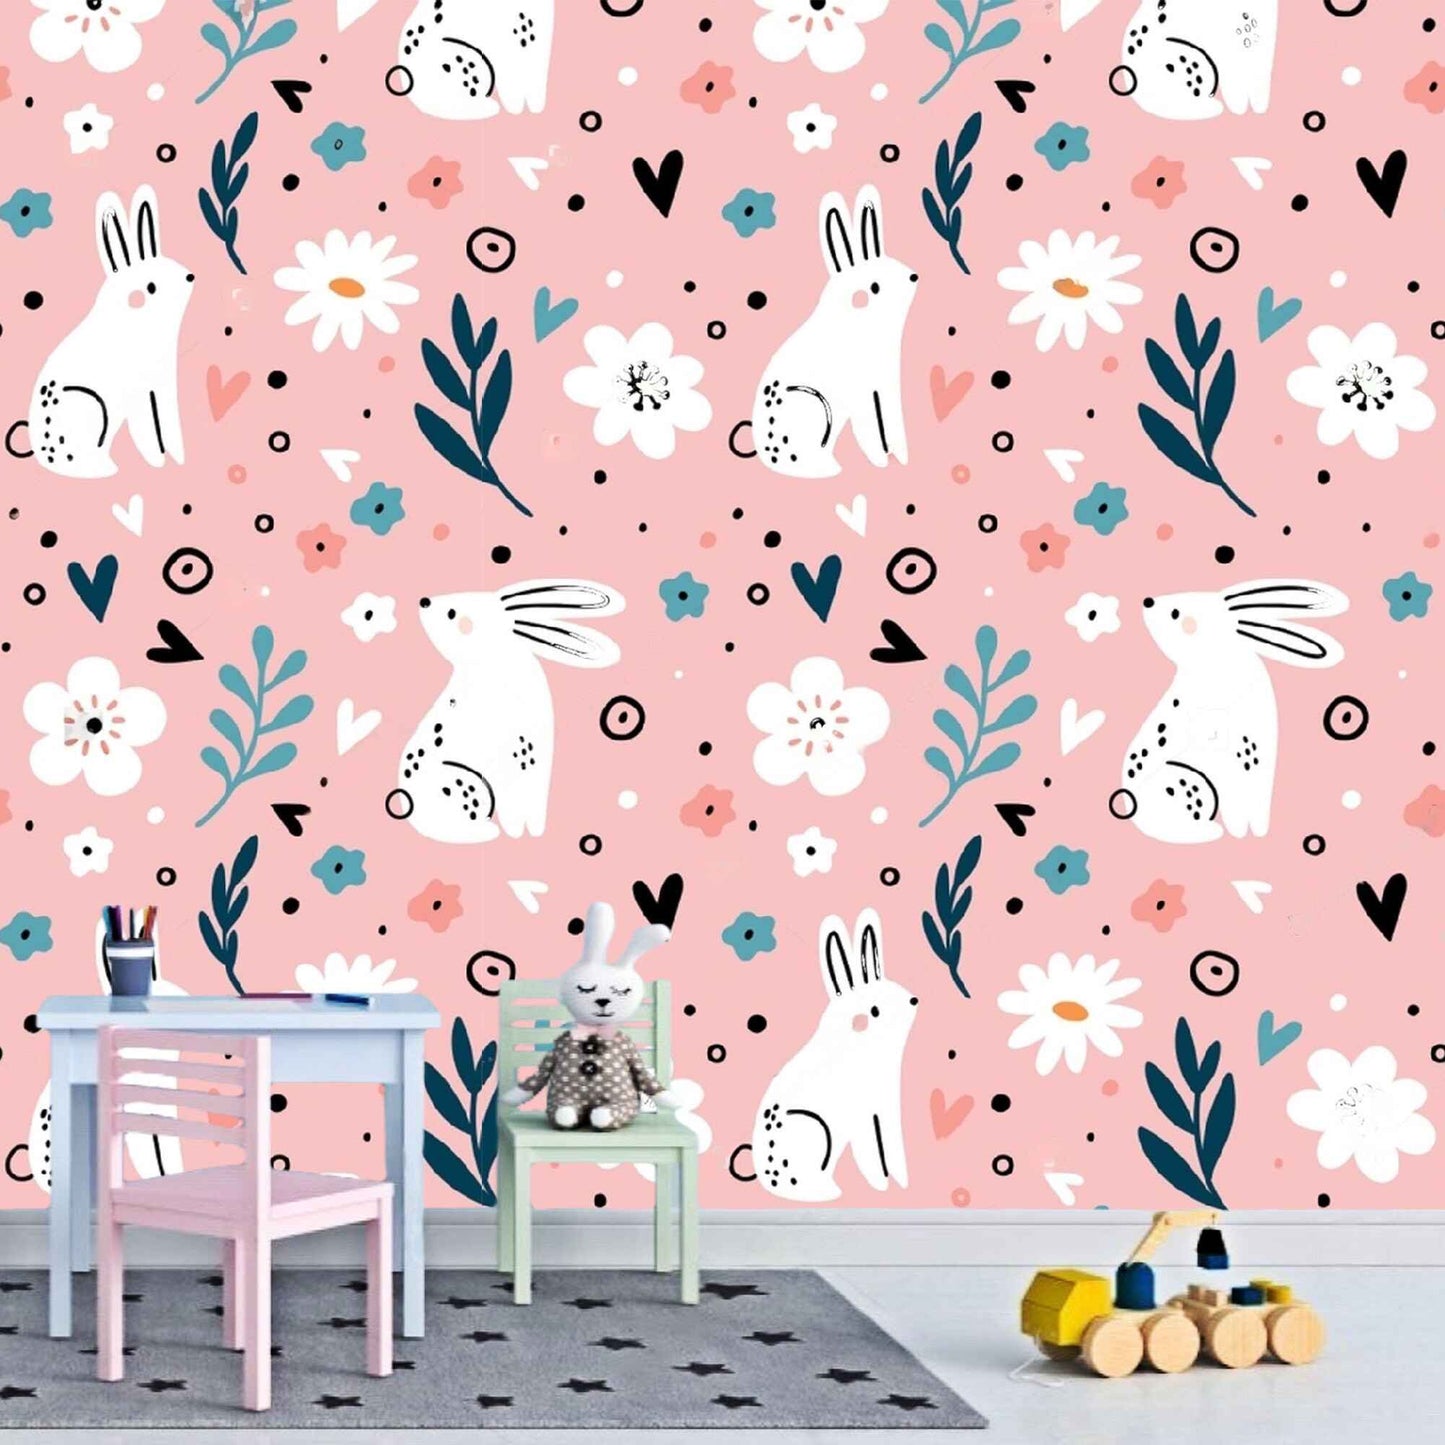 Charming rabbits pattern wallpaper in a newborn's bedroom, adding a touch of sweetness and playfulness to the decor.